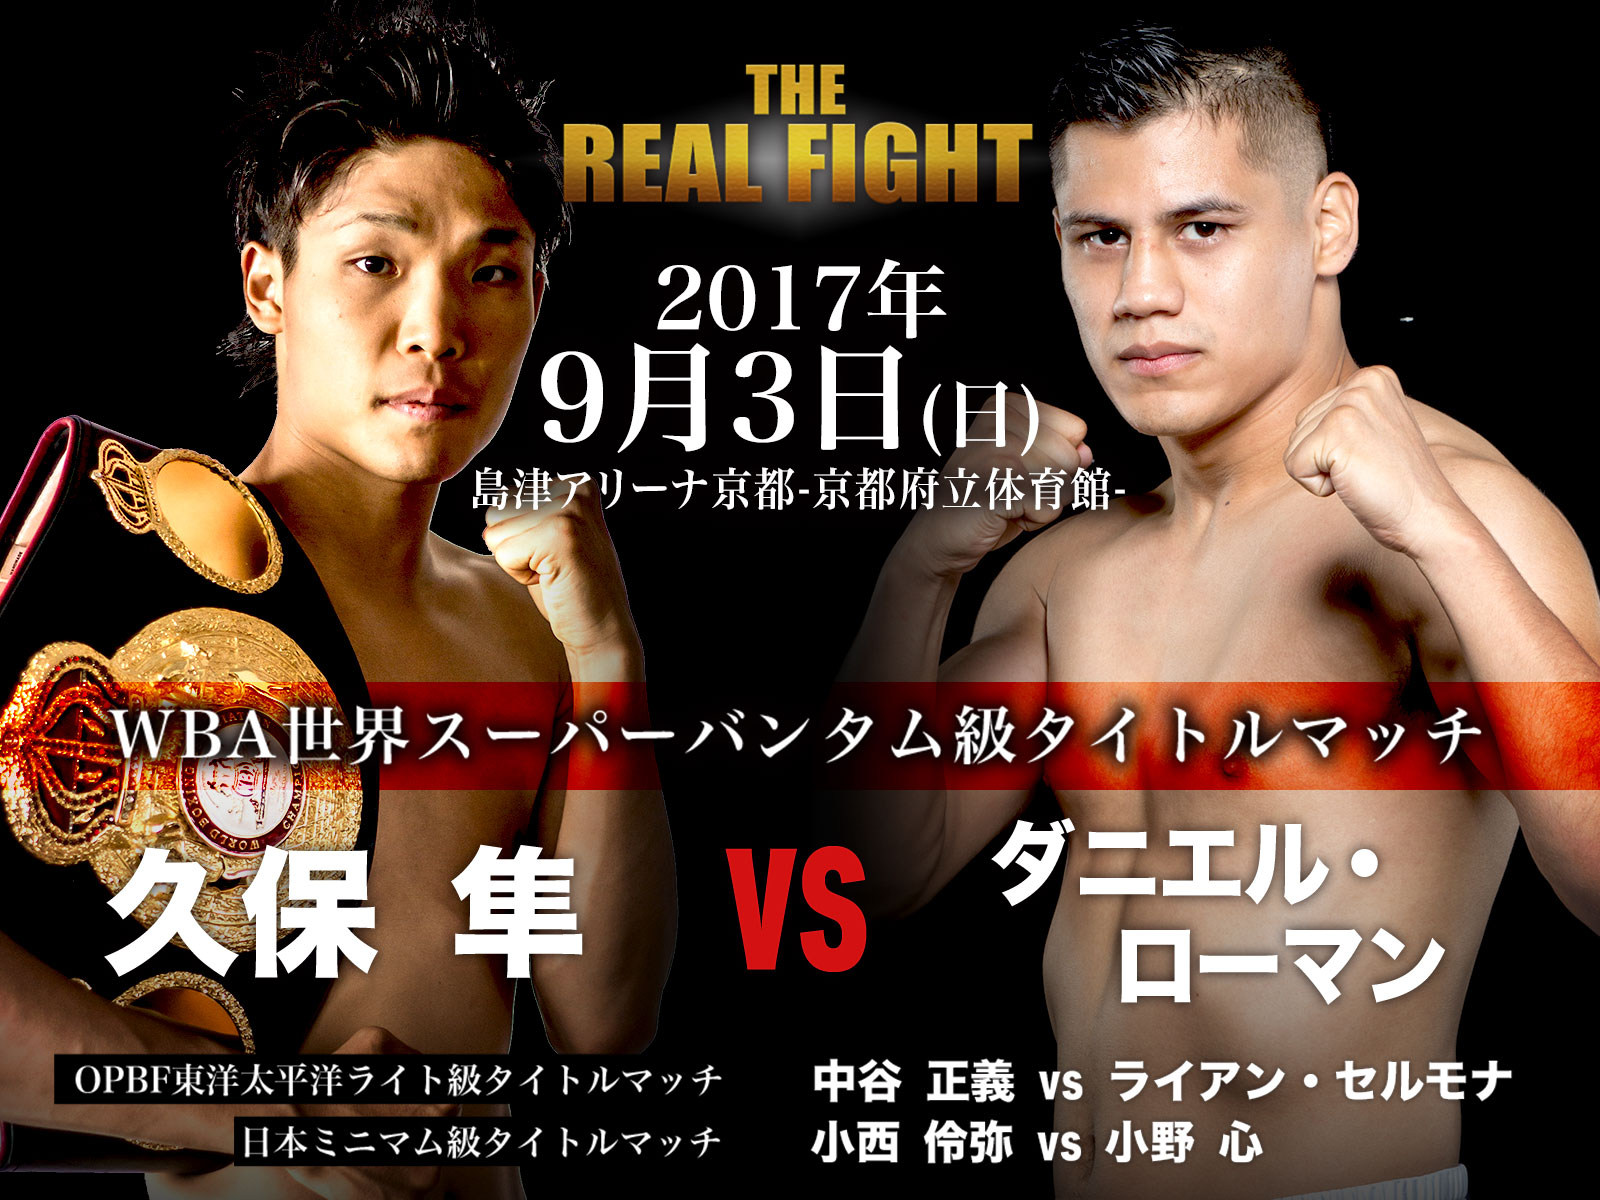 2017/9/3 THE REAL FIGHT[世界] 島津アリーナ京都